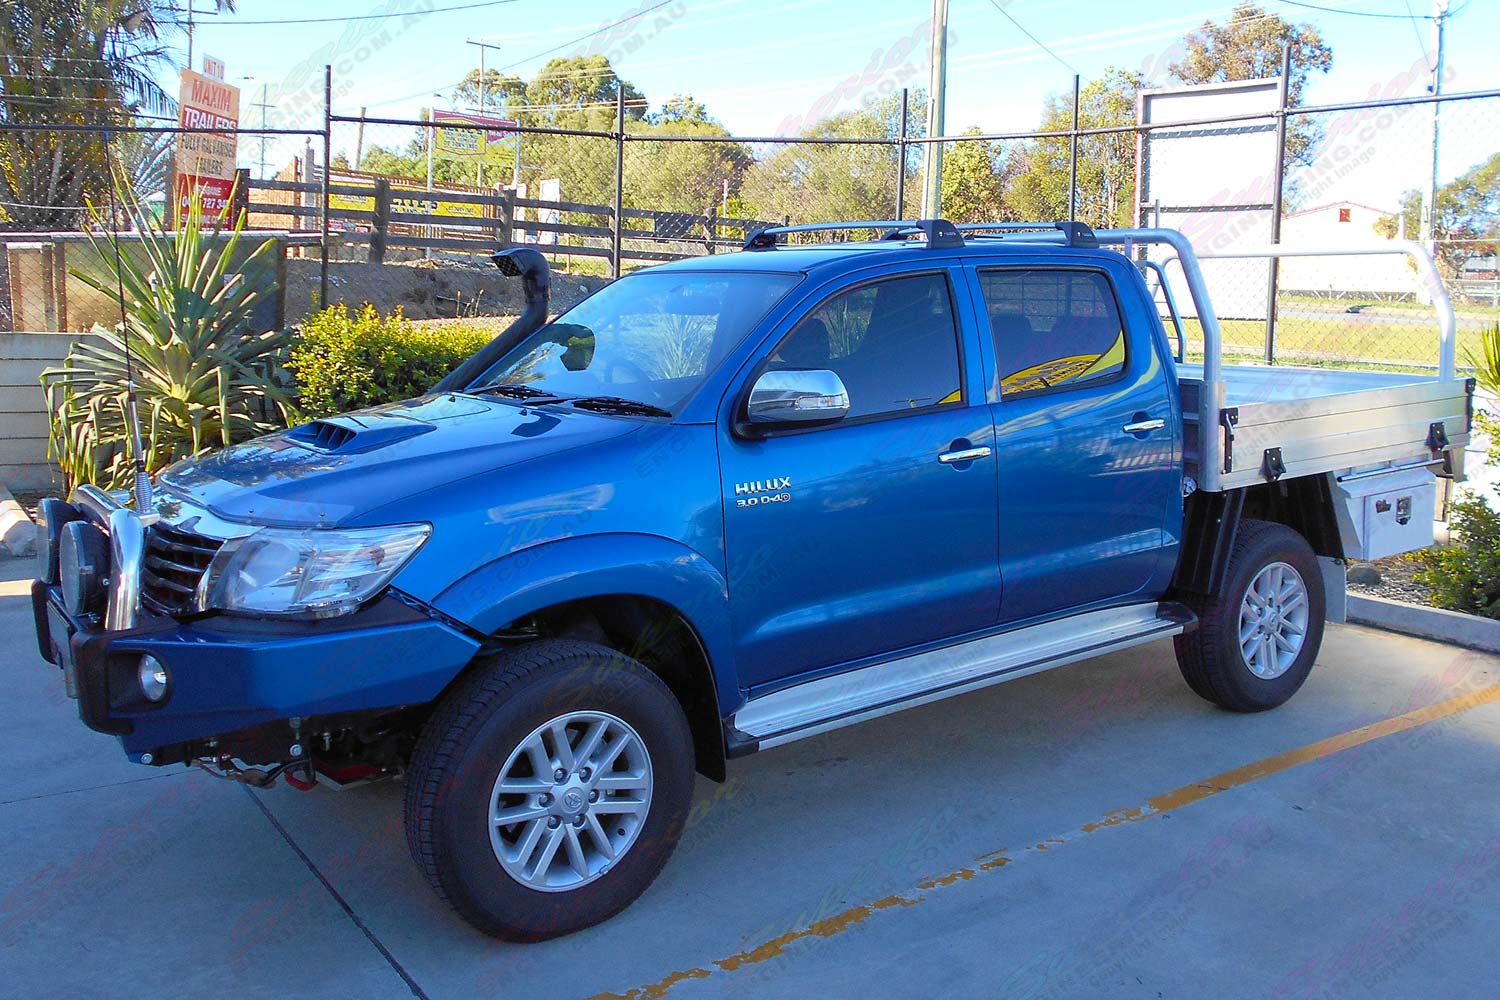 Left side view of a blue dual cab Toyota Hilux fitted with a 2 inch Bilstein lift kit, roof rack, snorkel, tool boxes, uhf radio & antenna